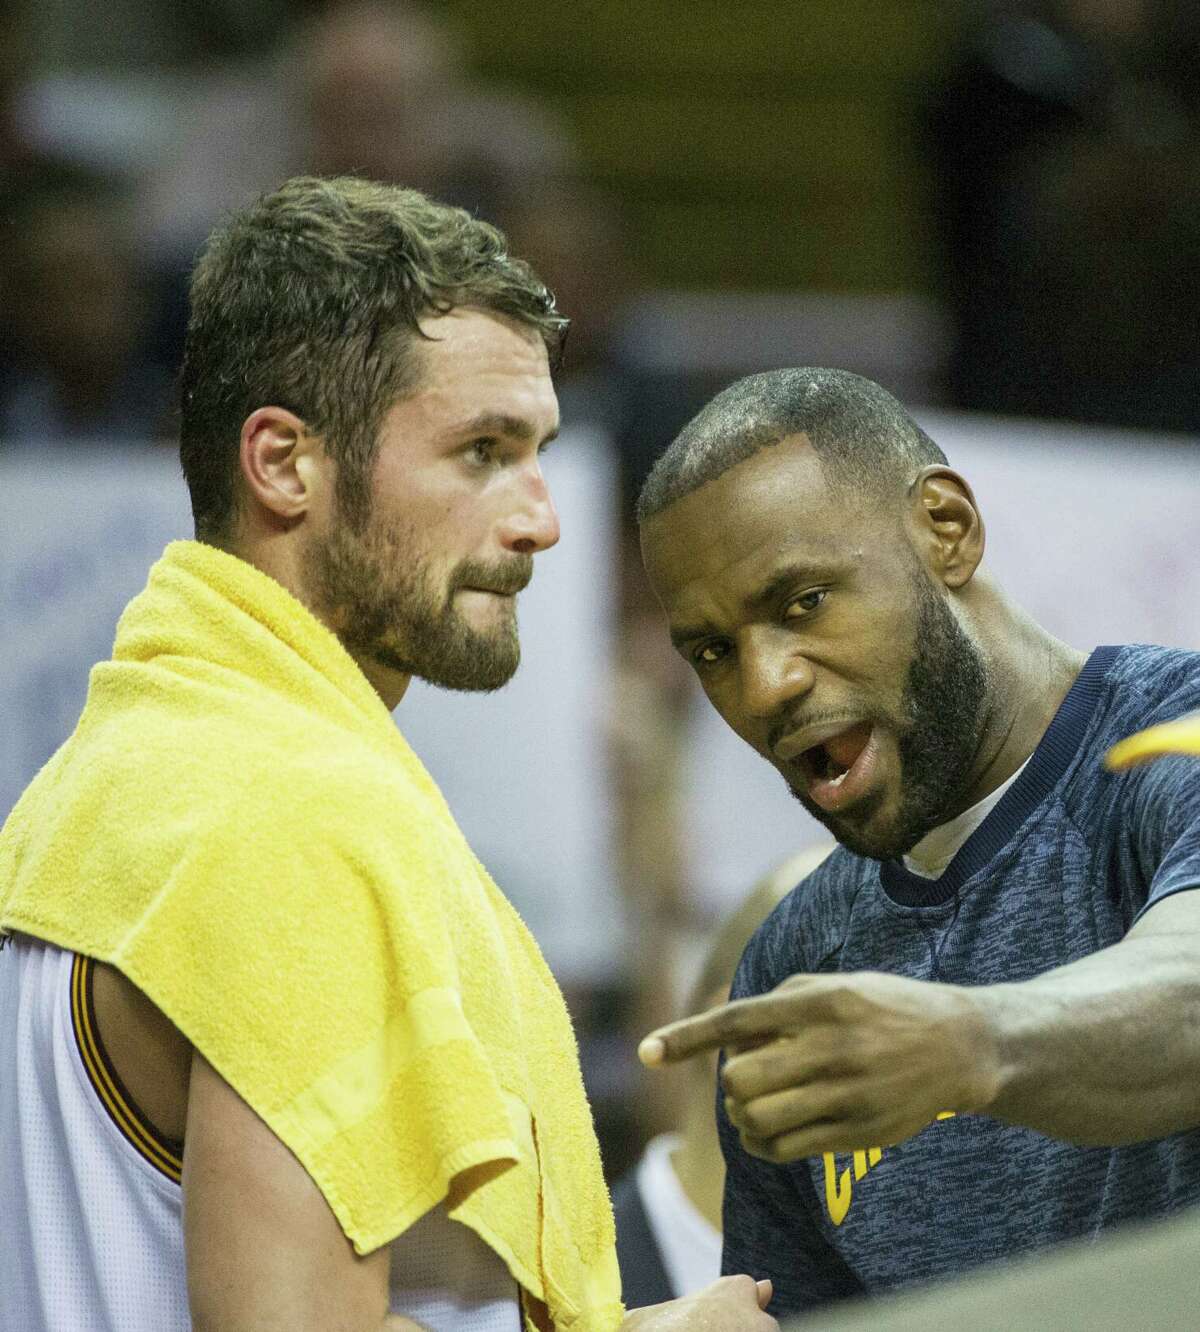 Cleveland Cavaliers’ Kevin Love (0) listens to LeBron James during a time out during the first half of an NBA preseason basketball game in Cleveland on Oct. 13, 2016.